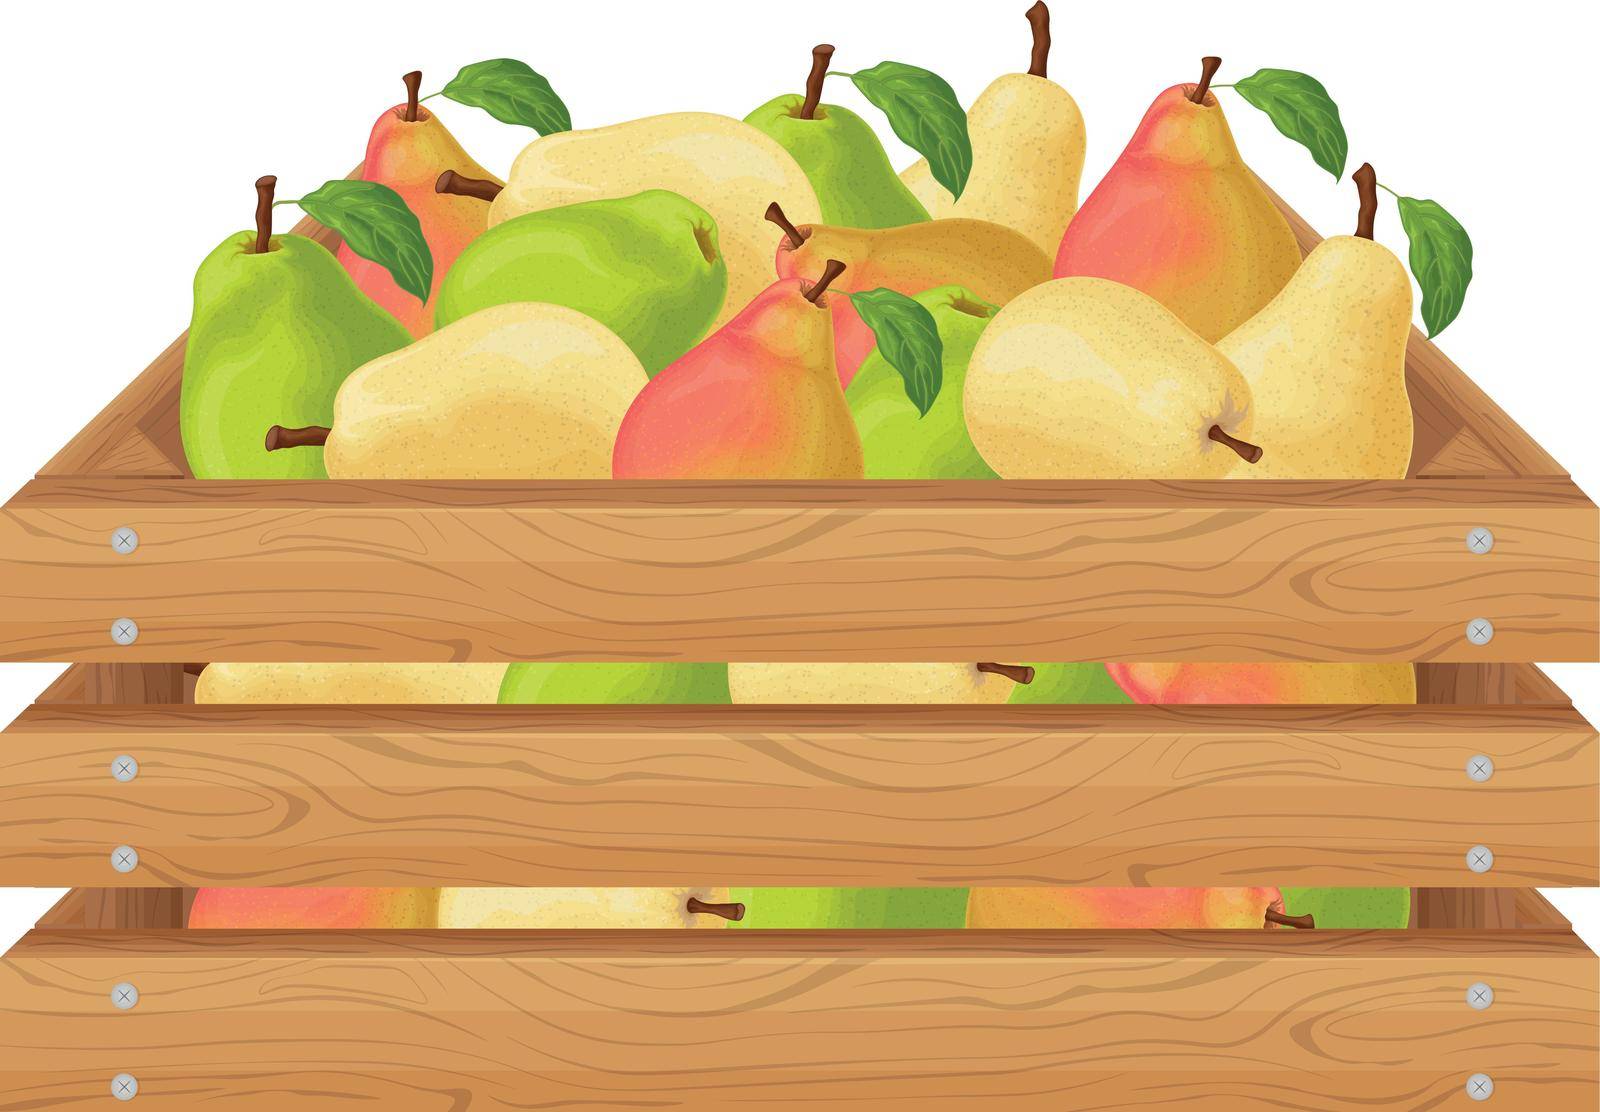 Pears. Wooden box with pears. Ripe pear fruits in a box. Fresh garden fruits. Juicy pears in a wooden box. Vector illustration isolated on a white background.